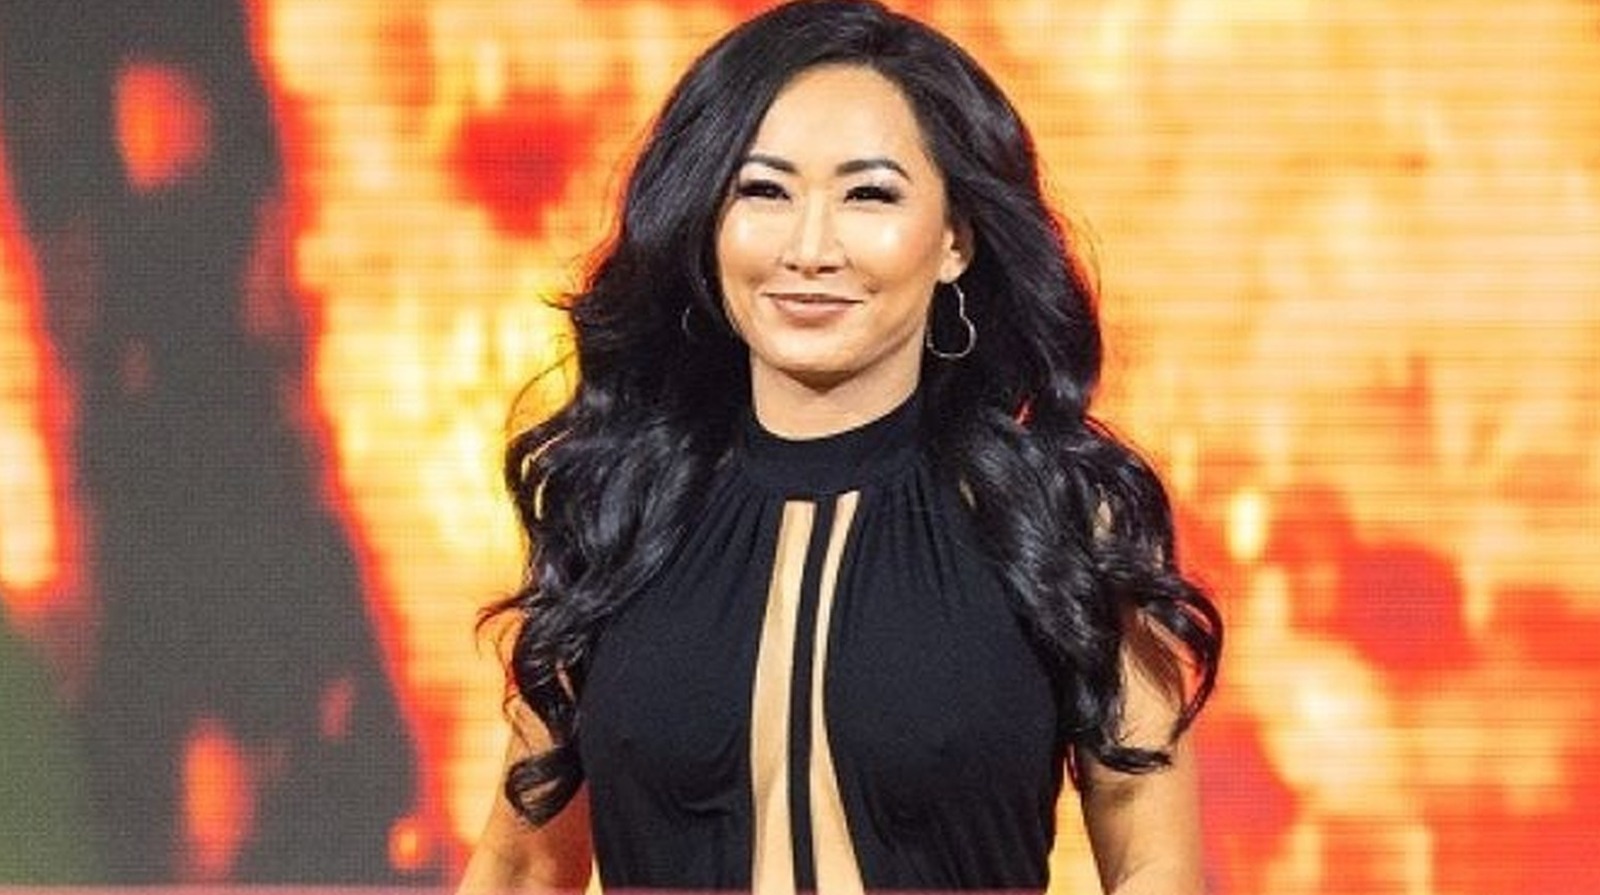 Gail Kim Reveals She Almost Renewed Hostilities With Iconic TNA Rival In WWE